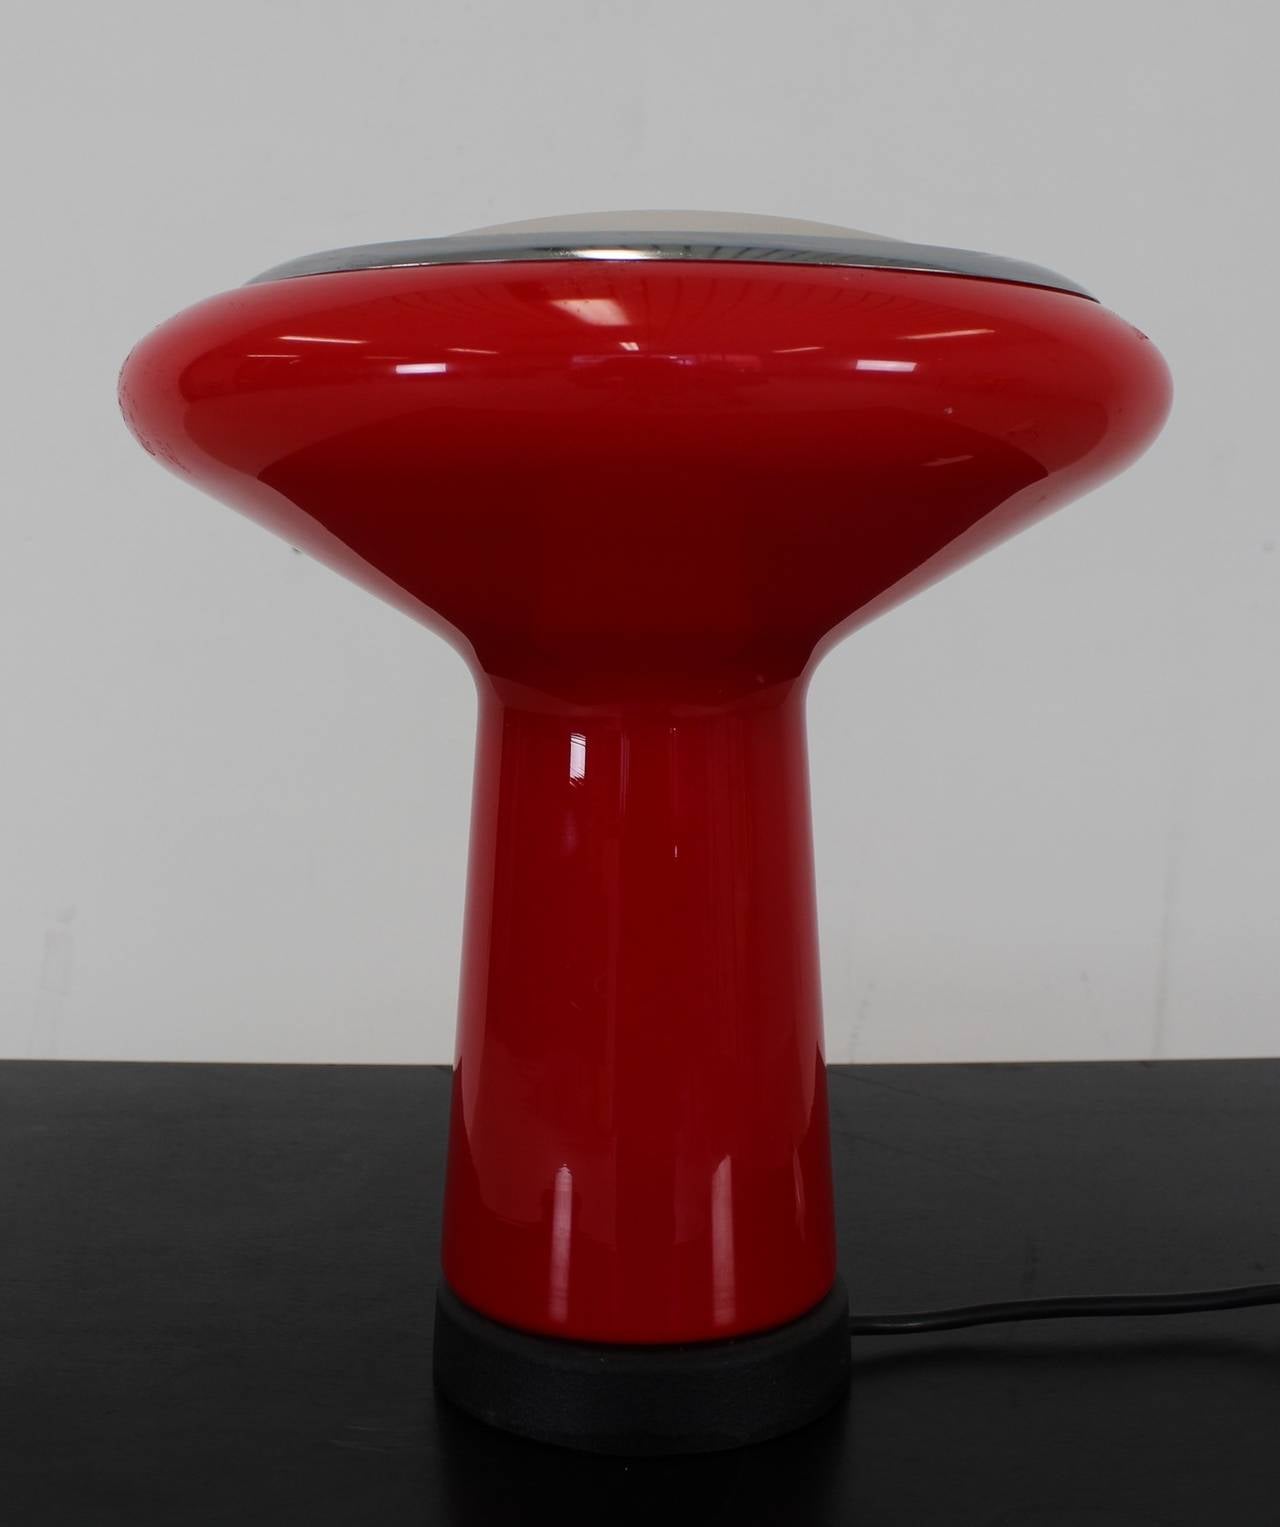 Very scarce floor or table lamp for Hiemstra Evolux, Holland.
Designer: Hiemstra Sr.
Red with chrome ring and white.
Documented in Nederlicht page 18).

Standard parcel shipment is advised